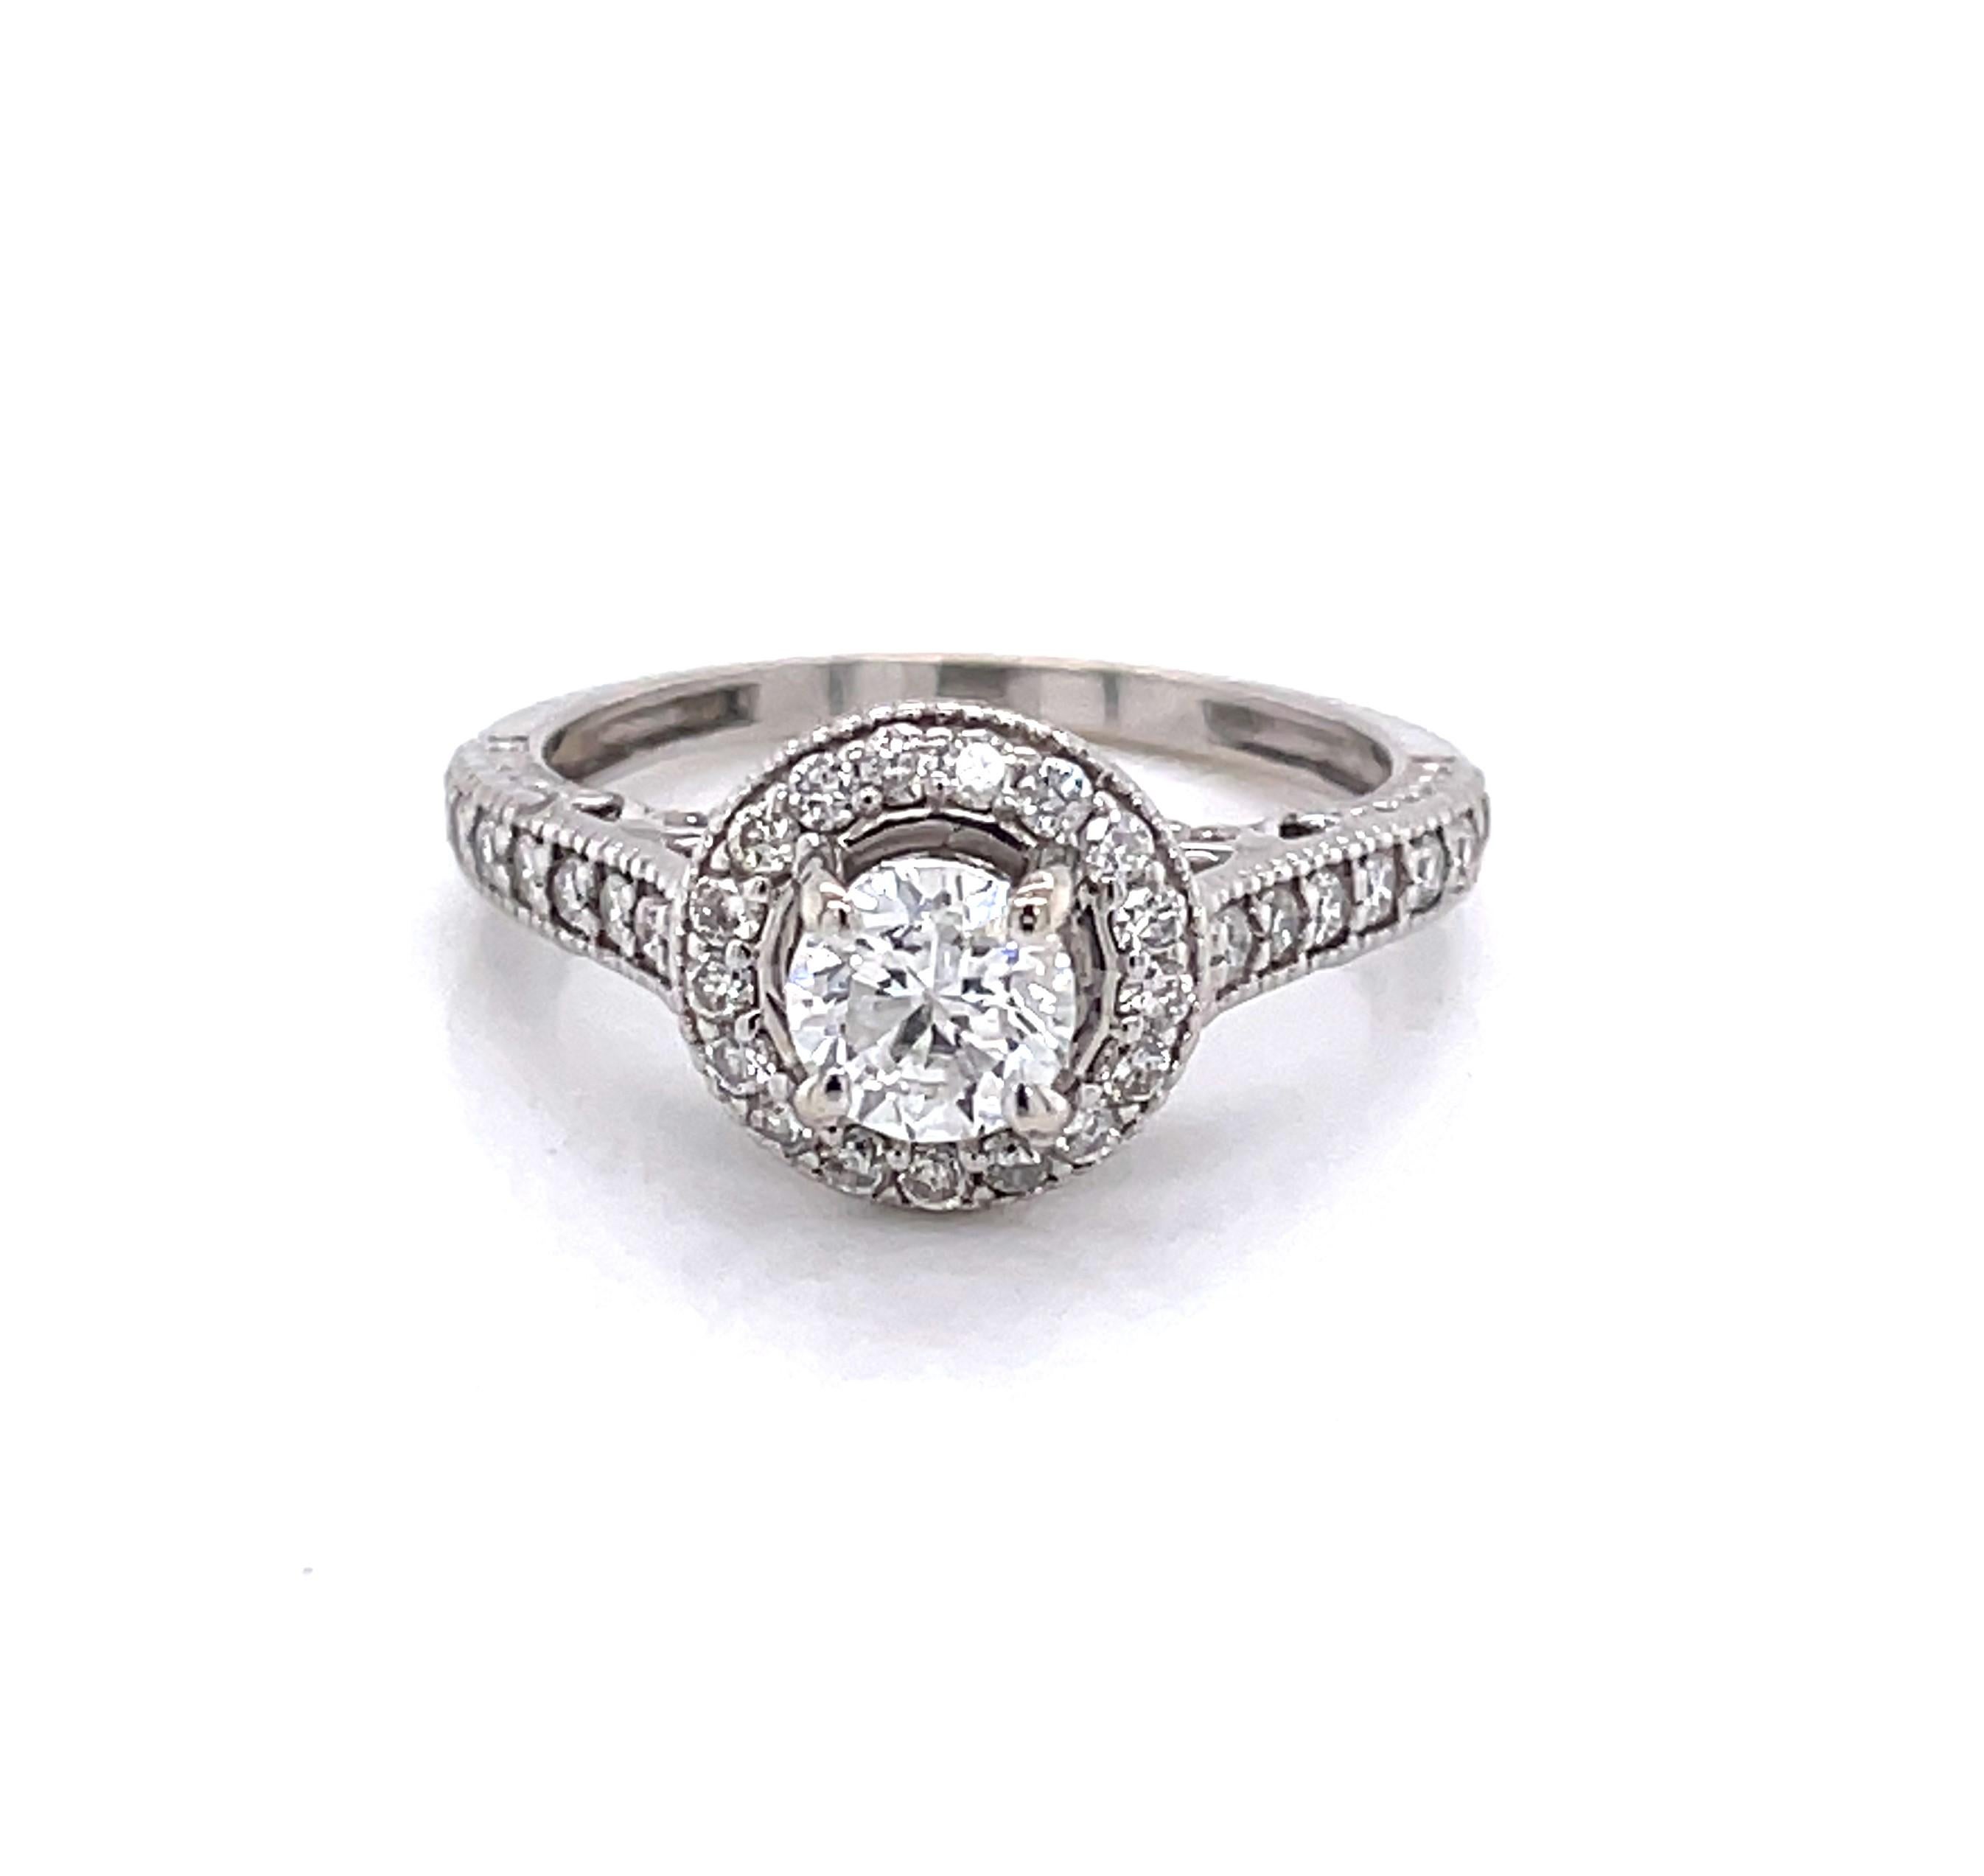 A  .53 carat H/VS round facet cut center diamond encircled with a diamond encrusted halo is the feature of this elegant engagement ring in fourteen karat 14k white gold. Fourteen sparkling side stones further illuminate the band. Total diamond carat